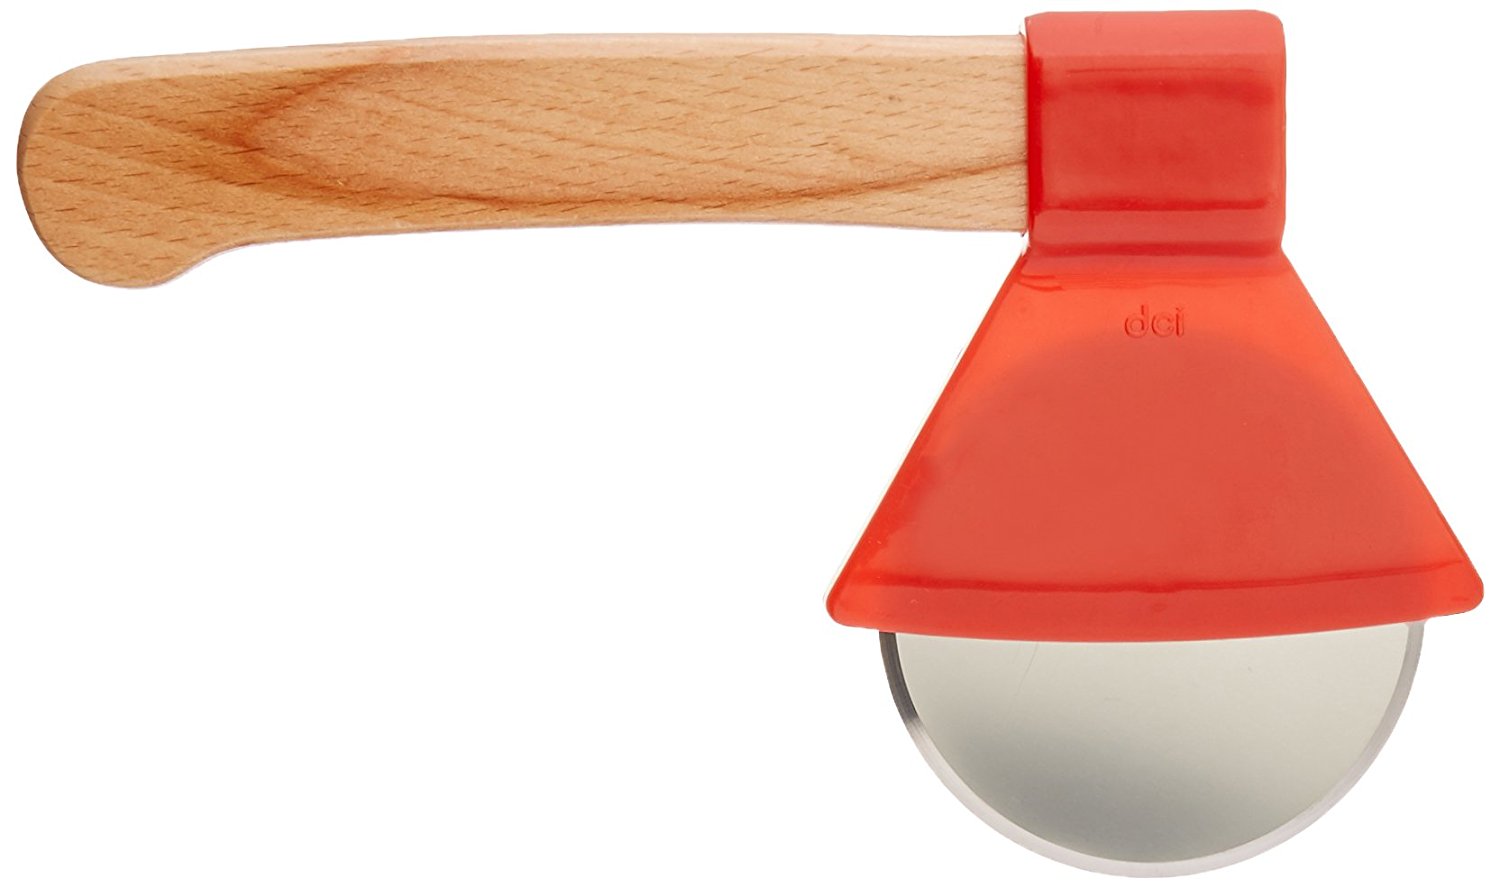 DCI Ax Pizza Cutter, Stainless Steel Cutting Blade and Wood Handle